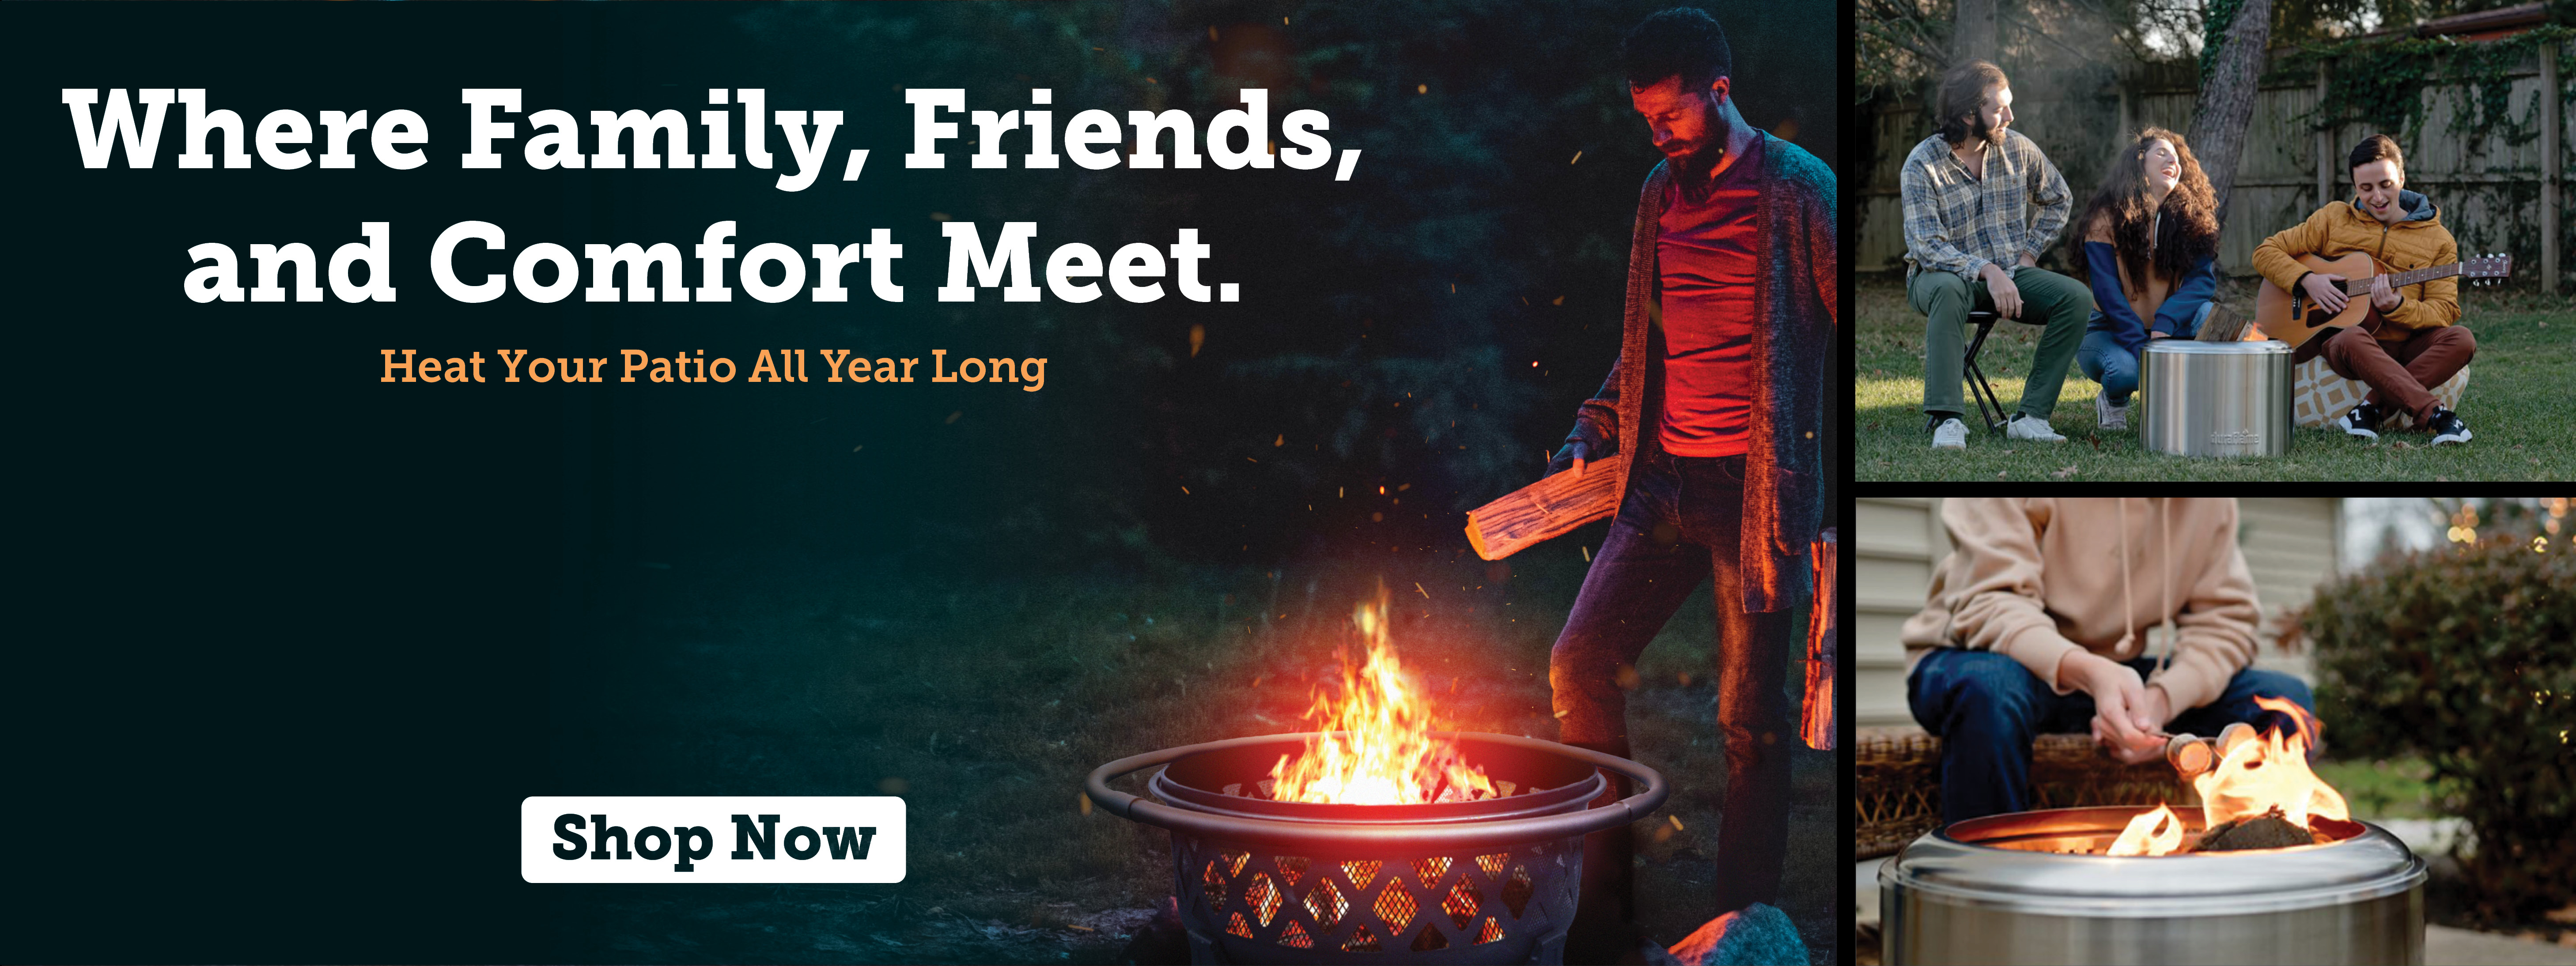 Where family, friends and comfort meet, shop outdoor heating